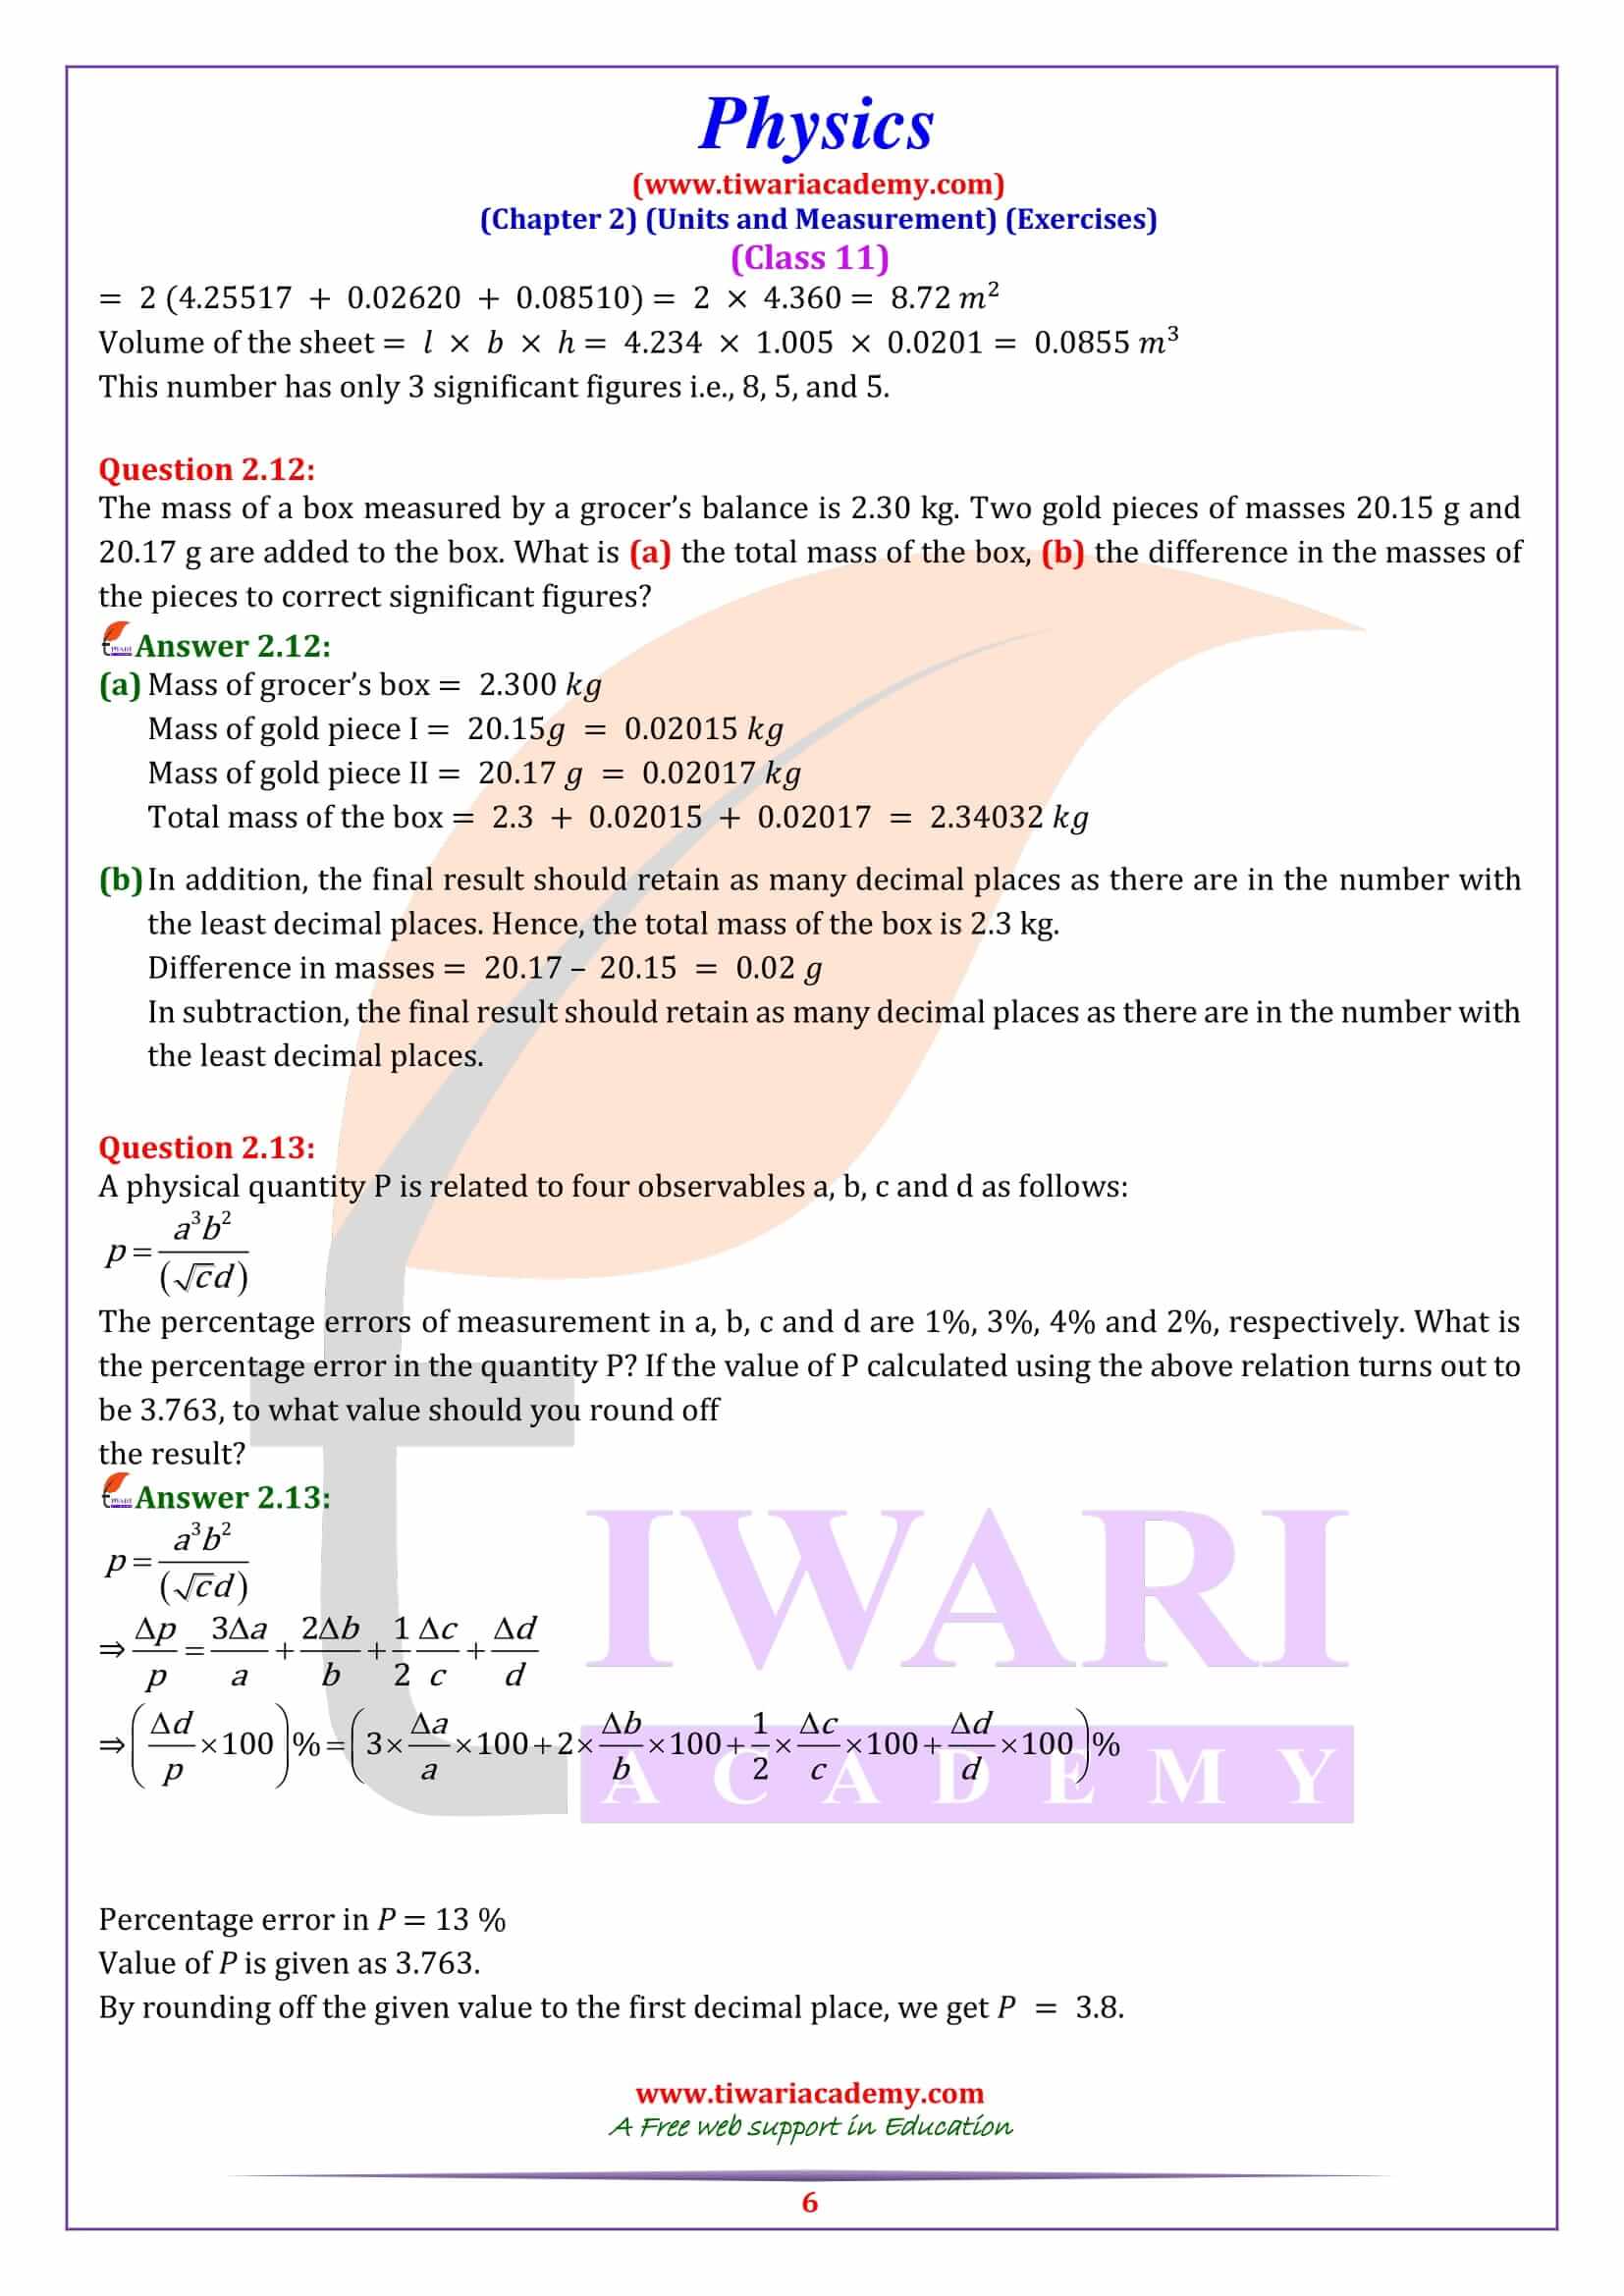 Class 11 Physics Chapter 2 all exercises guide